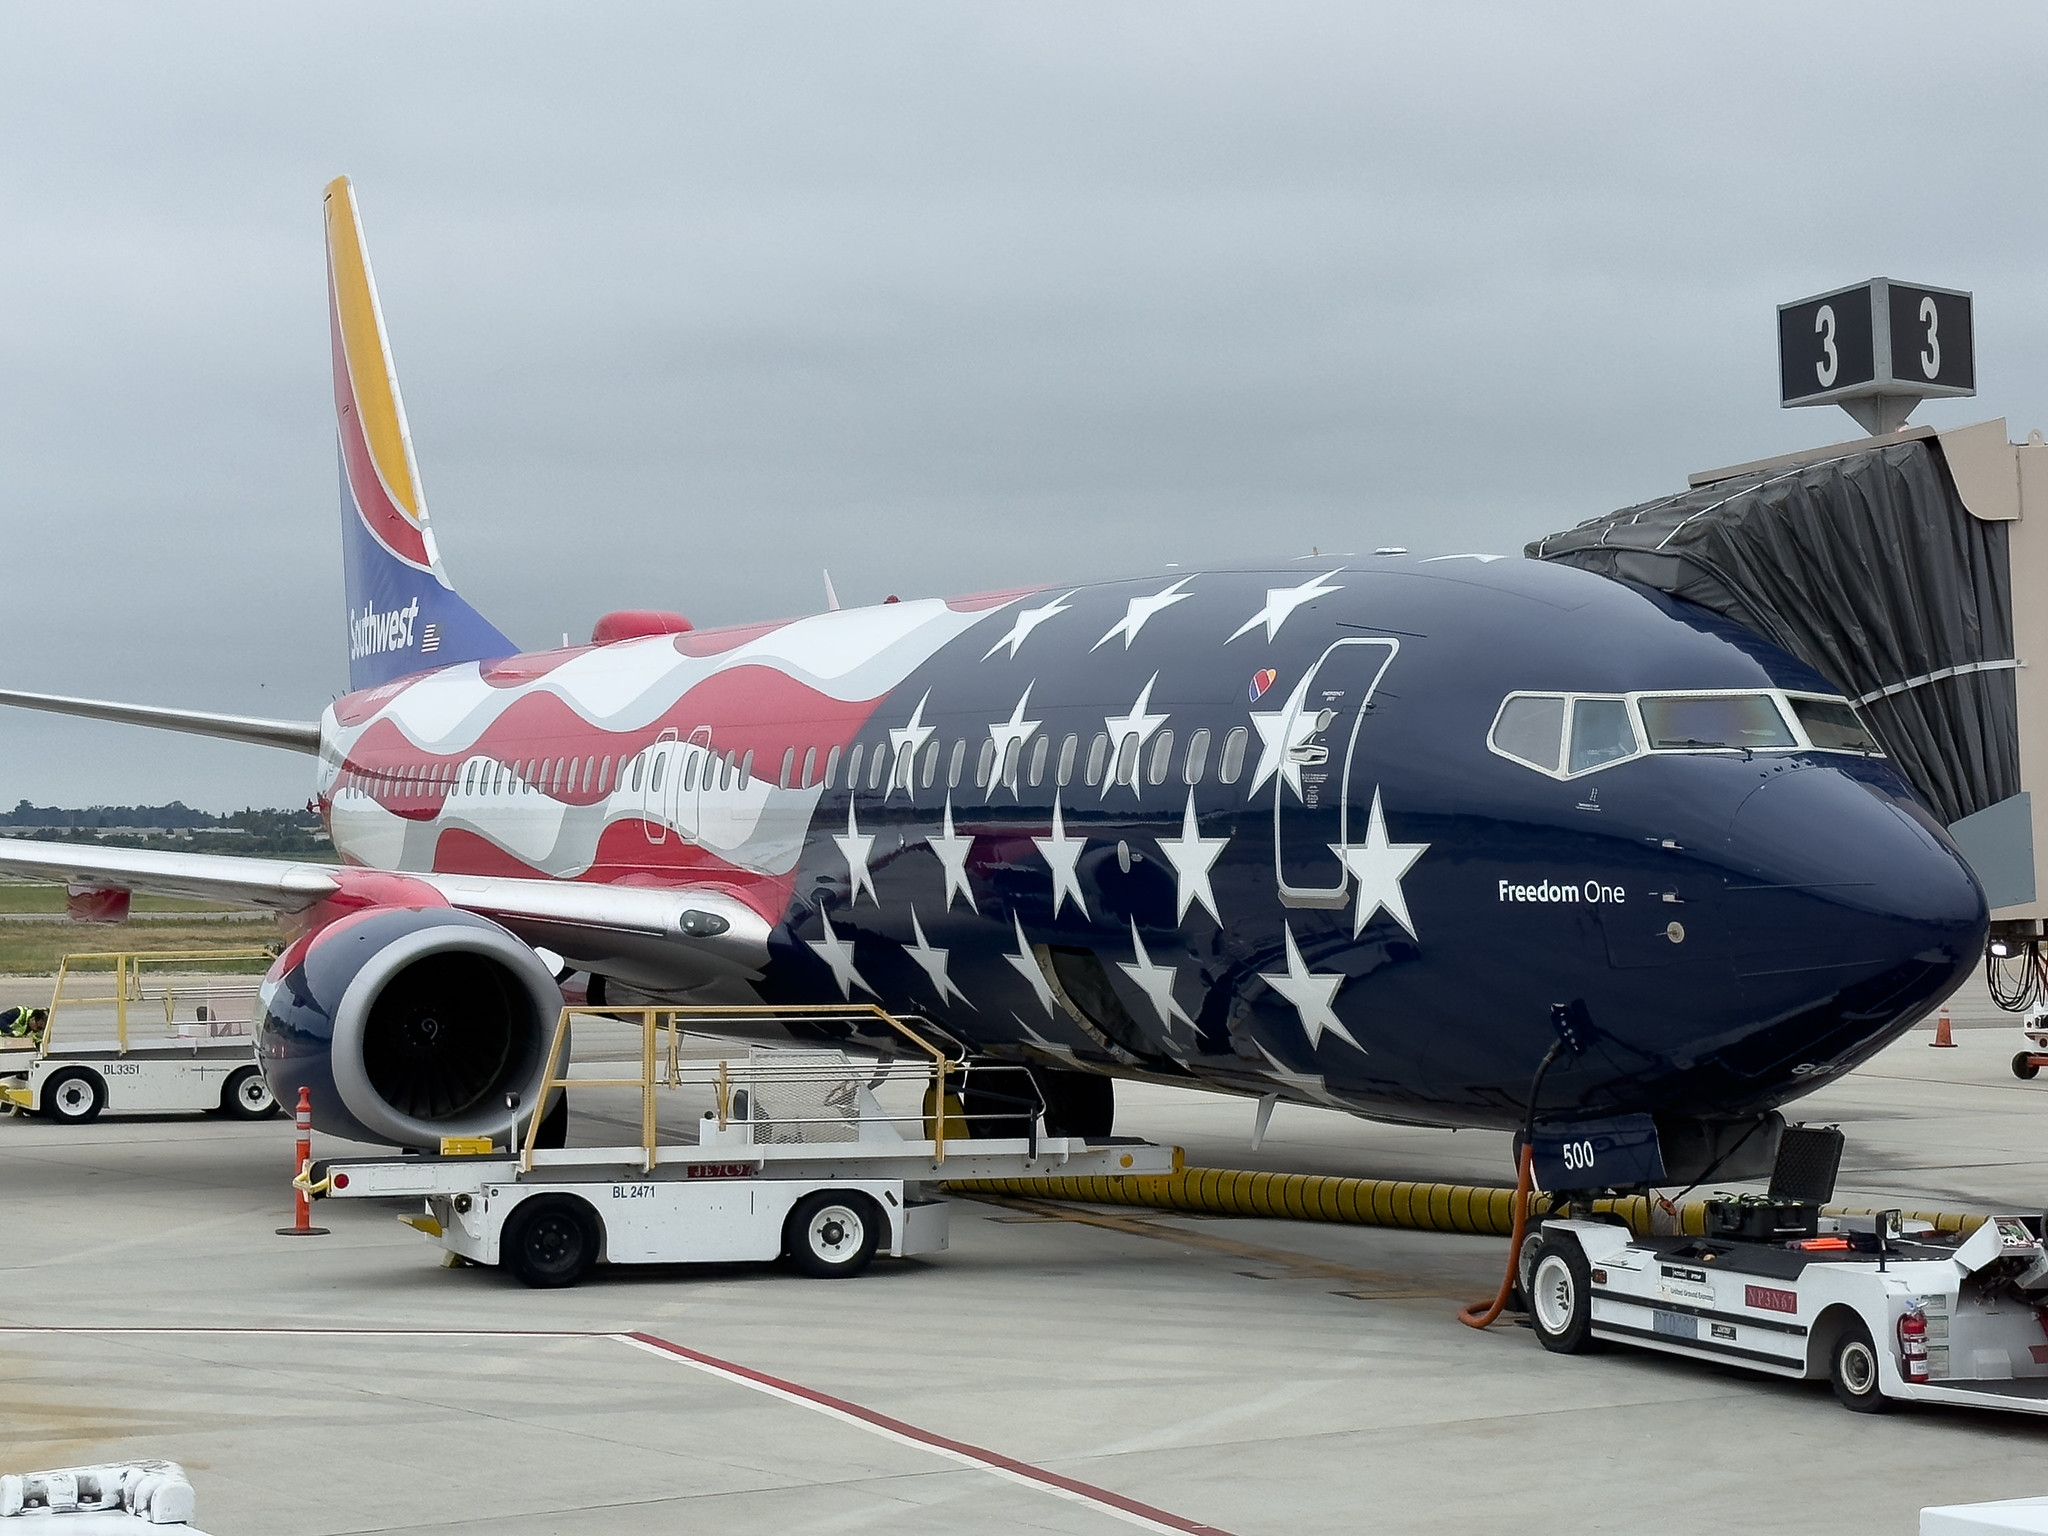 A Southwest Airlines aircraft painted in Freedom One livery.